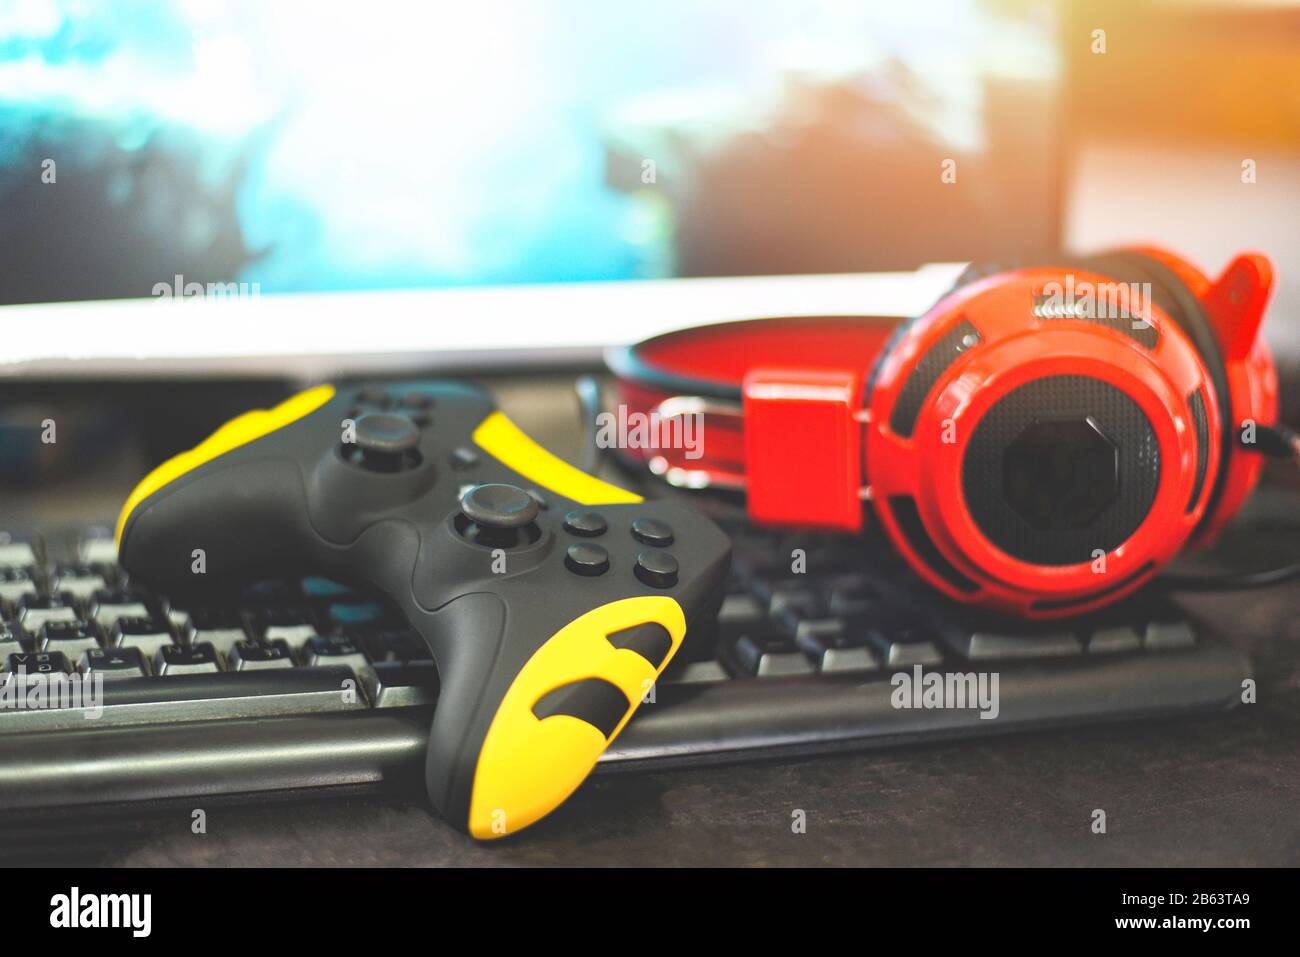 Game pad joystick and Headphones on keyboard playing gaming and watching video on tv or Computer games console concept Stock Photo